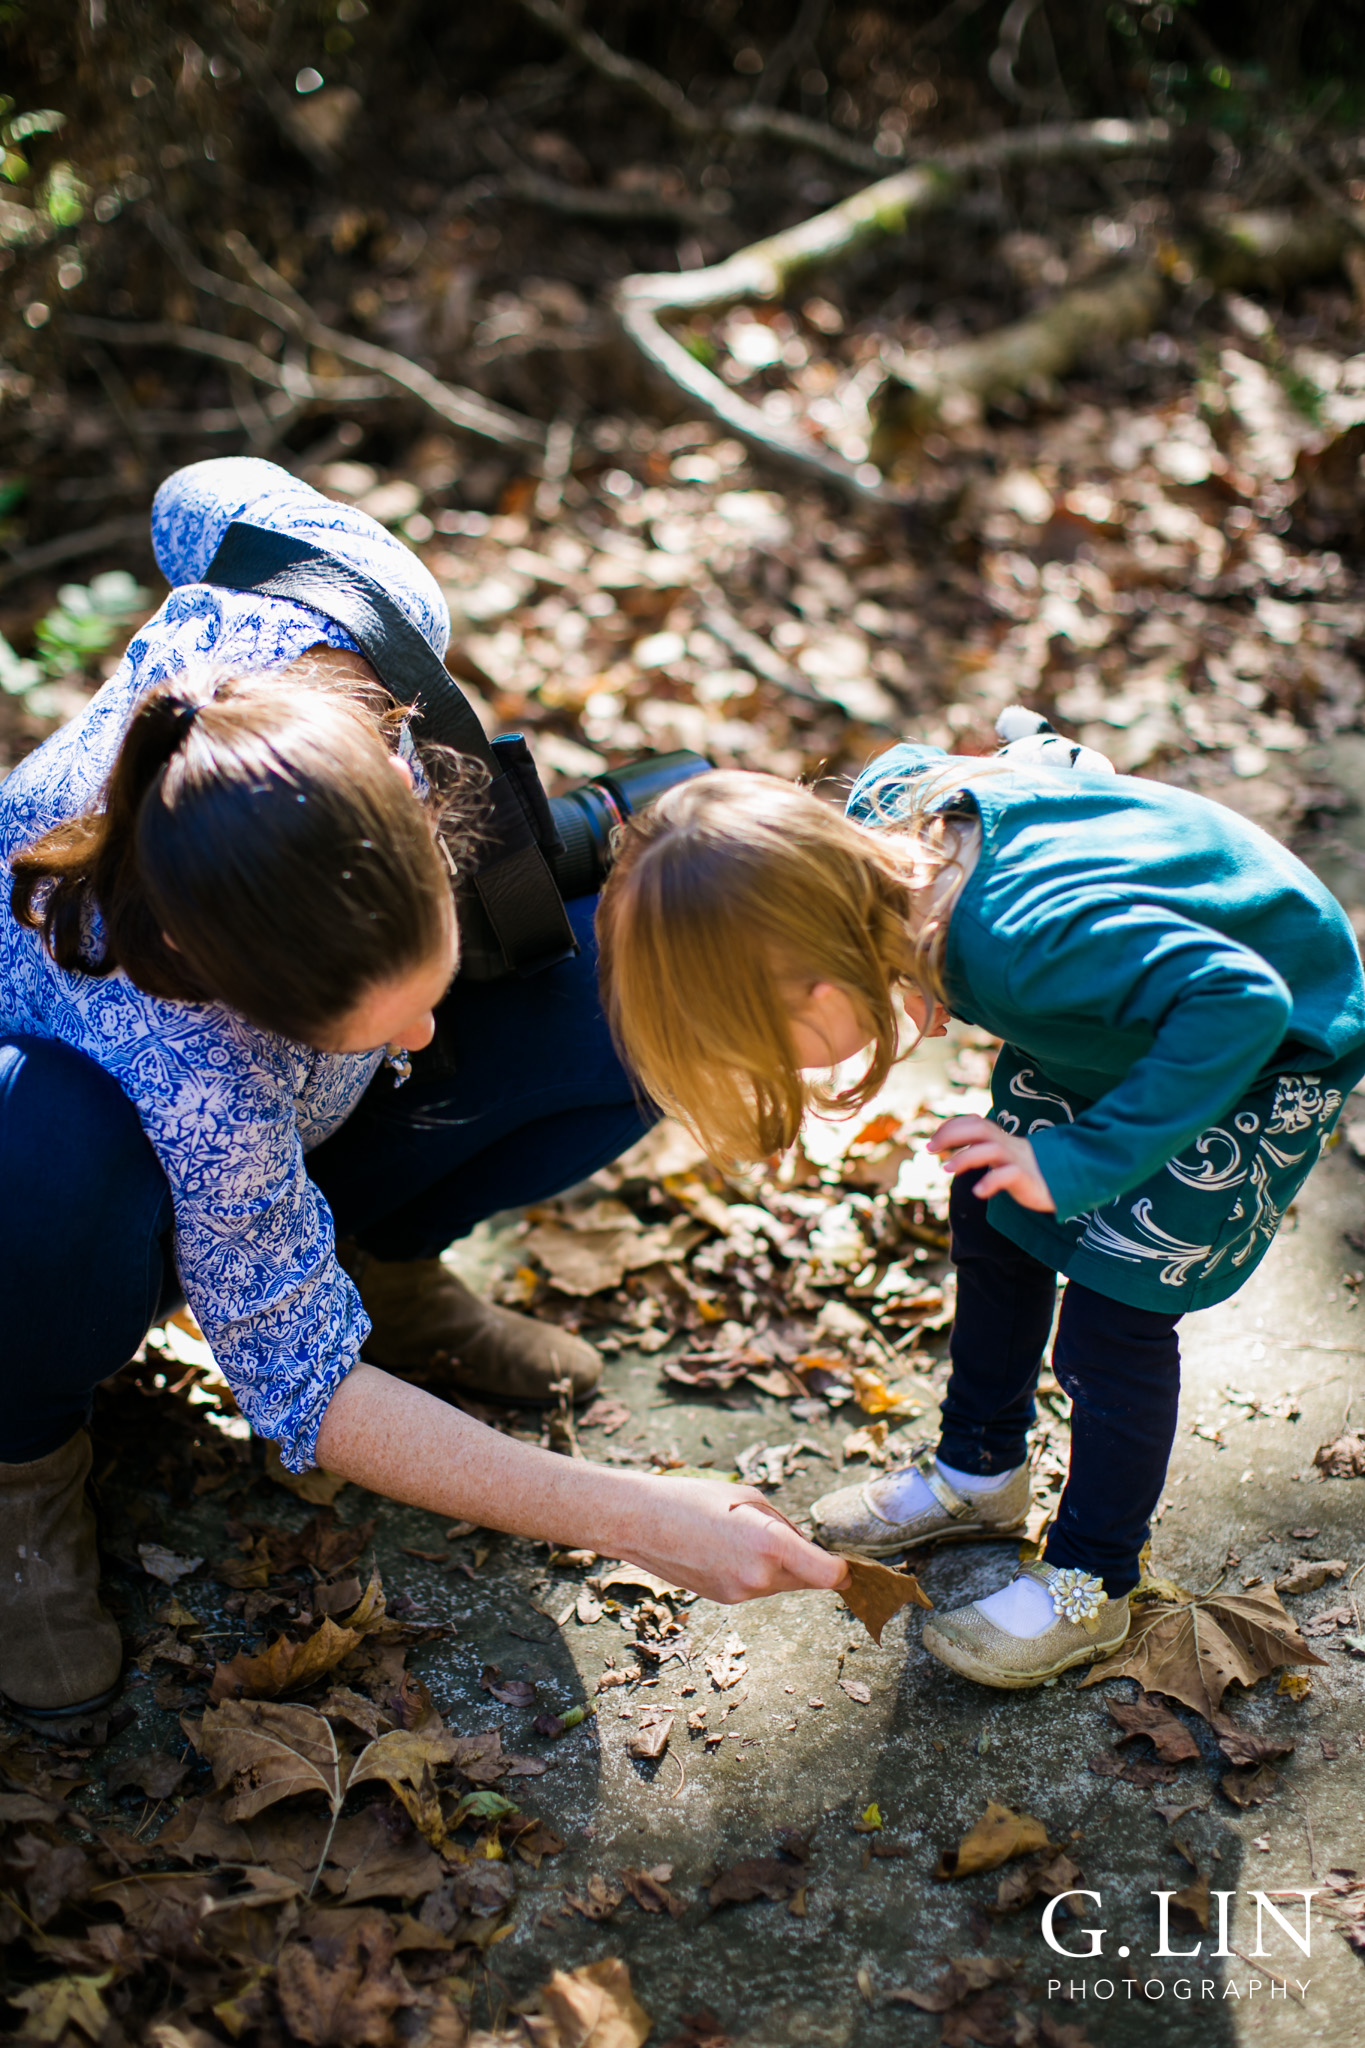 Durham Family Photographer | G. Lin Photography | Mother wiping off dirt from daughter's shoes